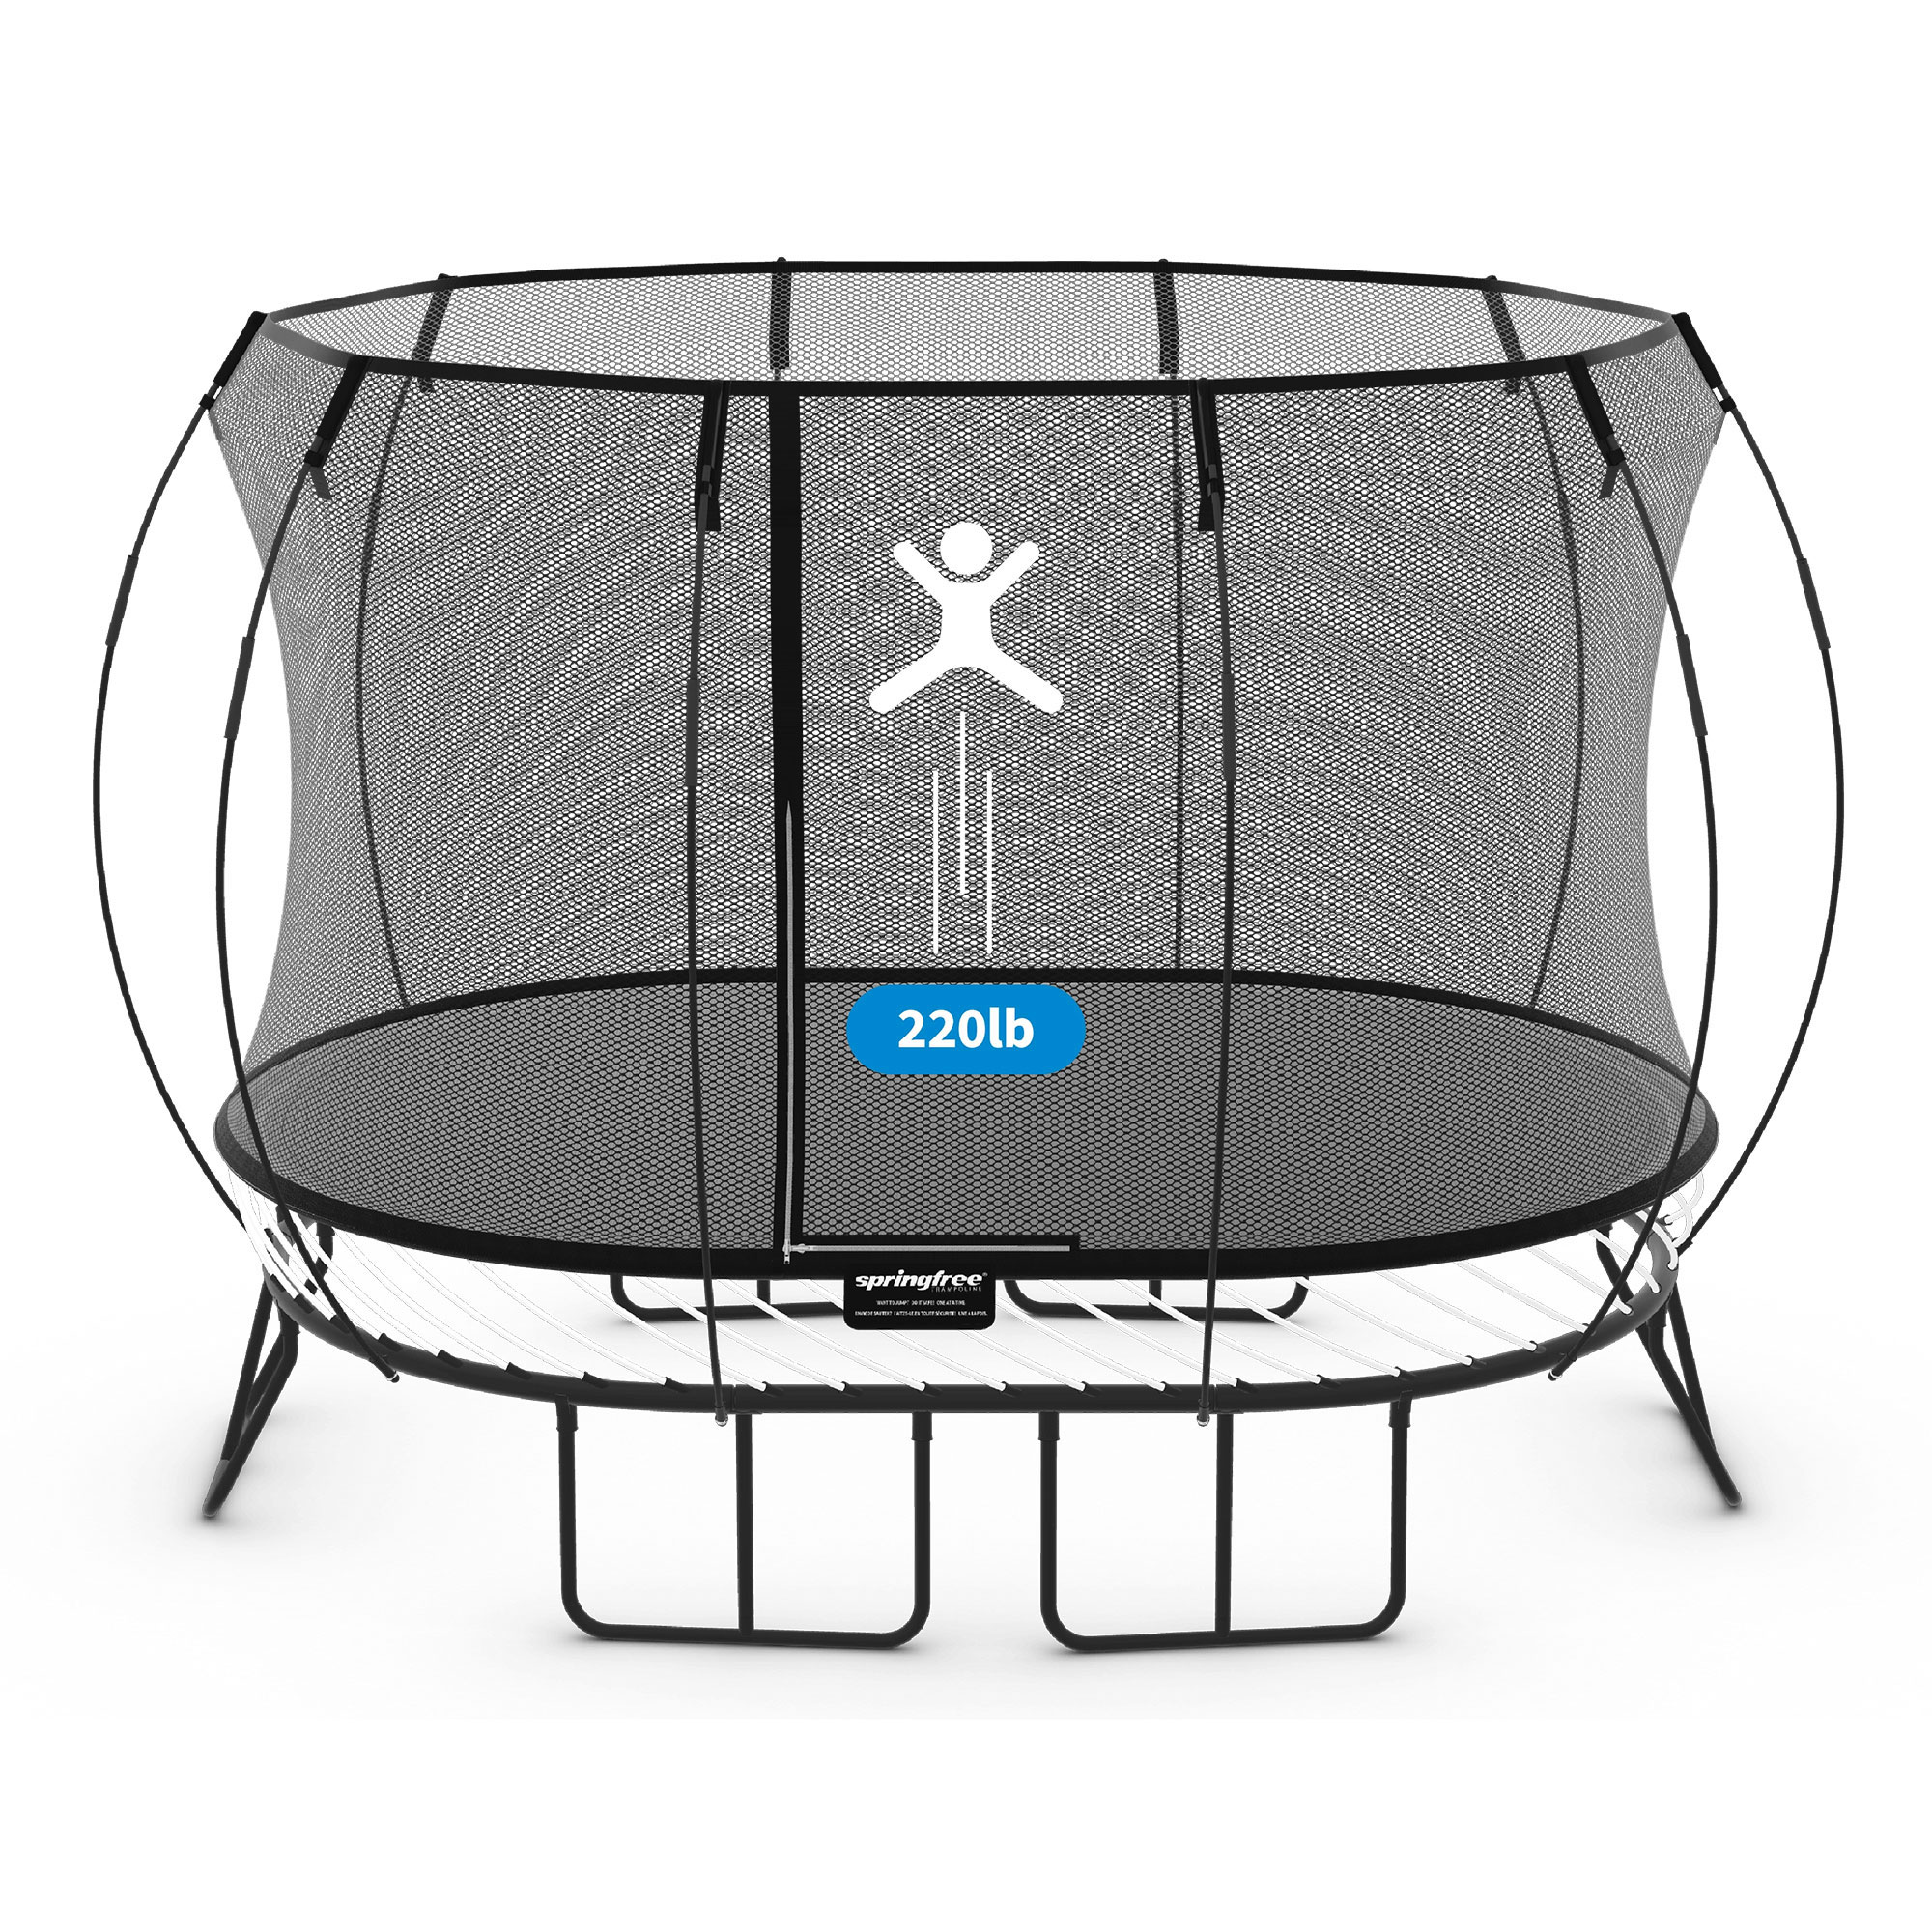 Springfree Outdoor Compact Oval Kids Trampoline for Outdoor Use, Black - image 3 of 9